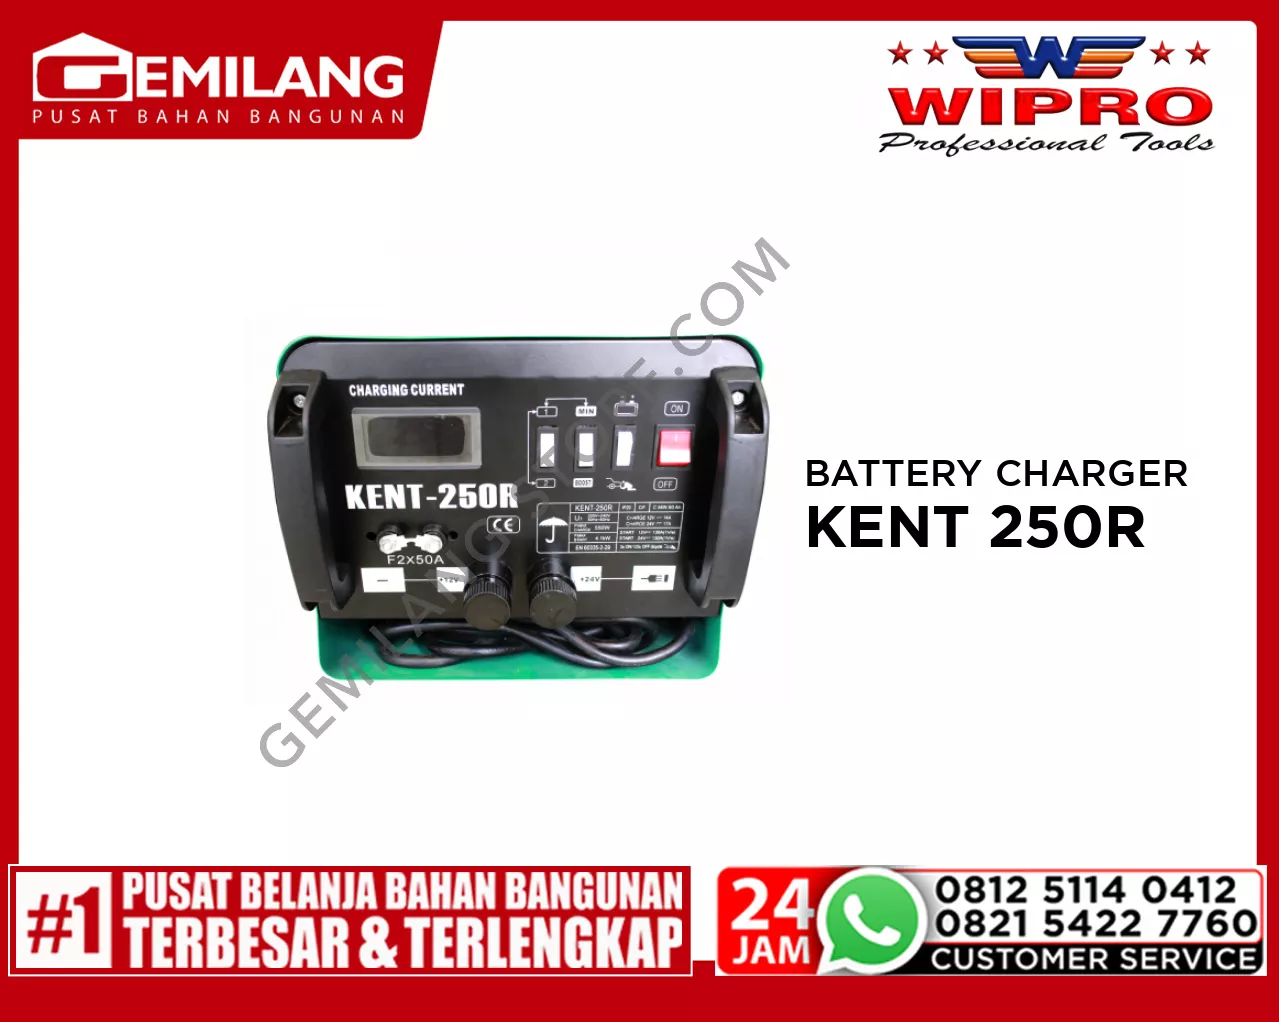 WIPRO BATTERY CHARGER KENT 250R